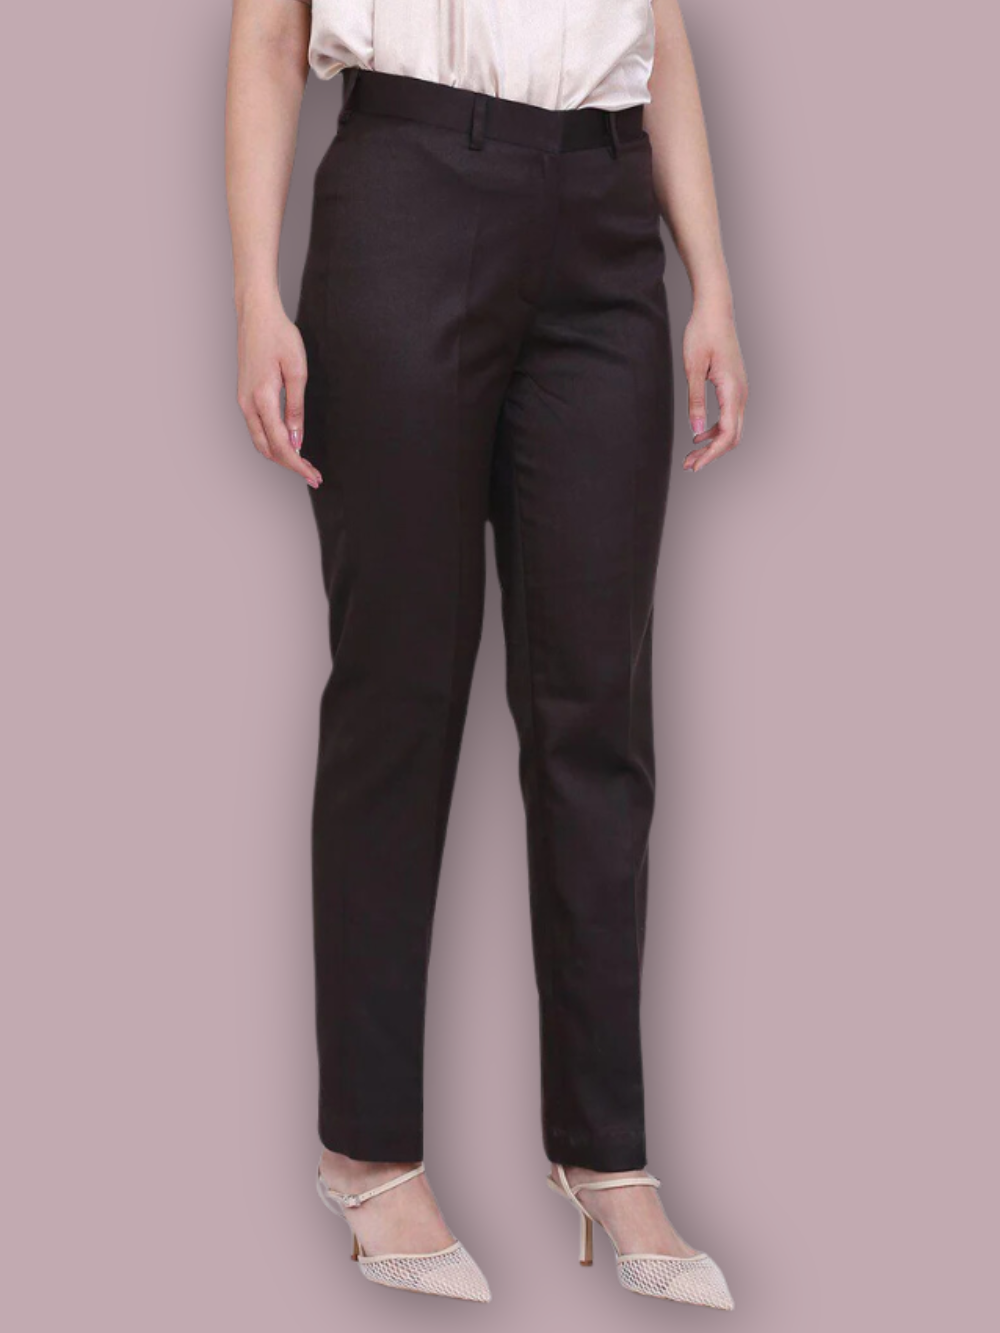 Ladies Structure Formal Office Pants With Pockets